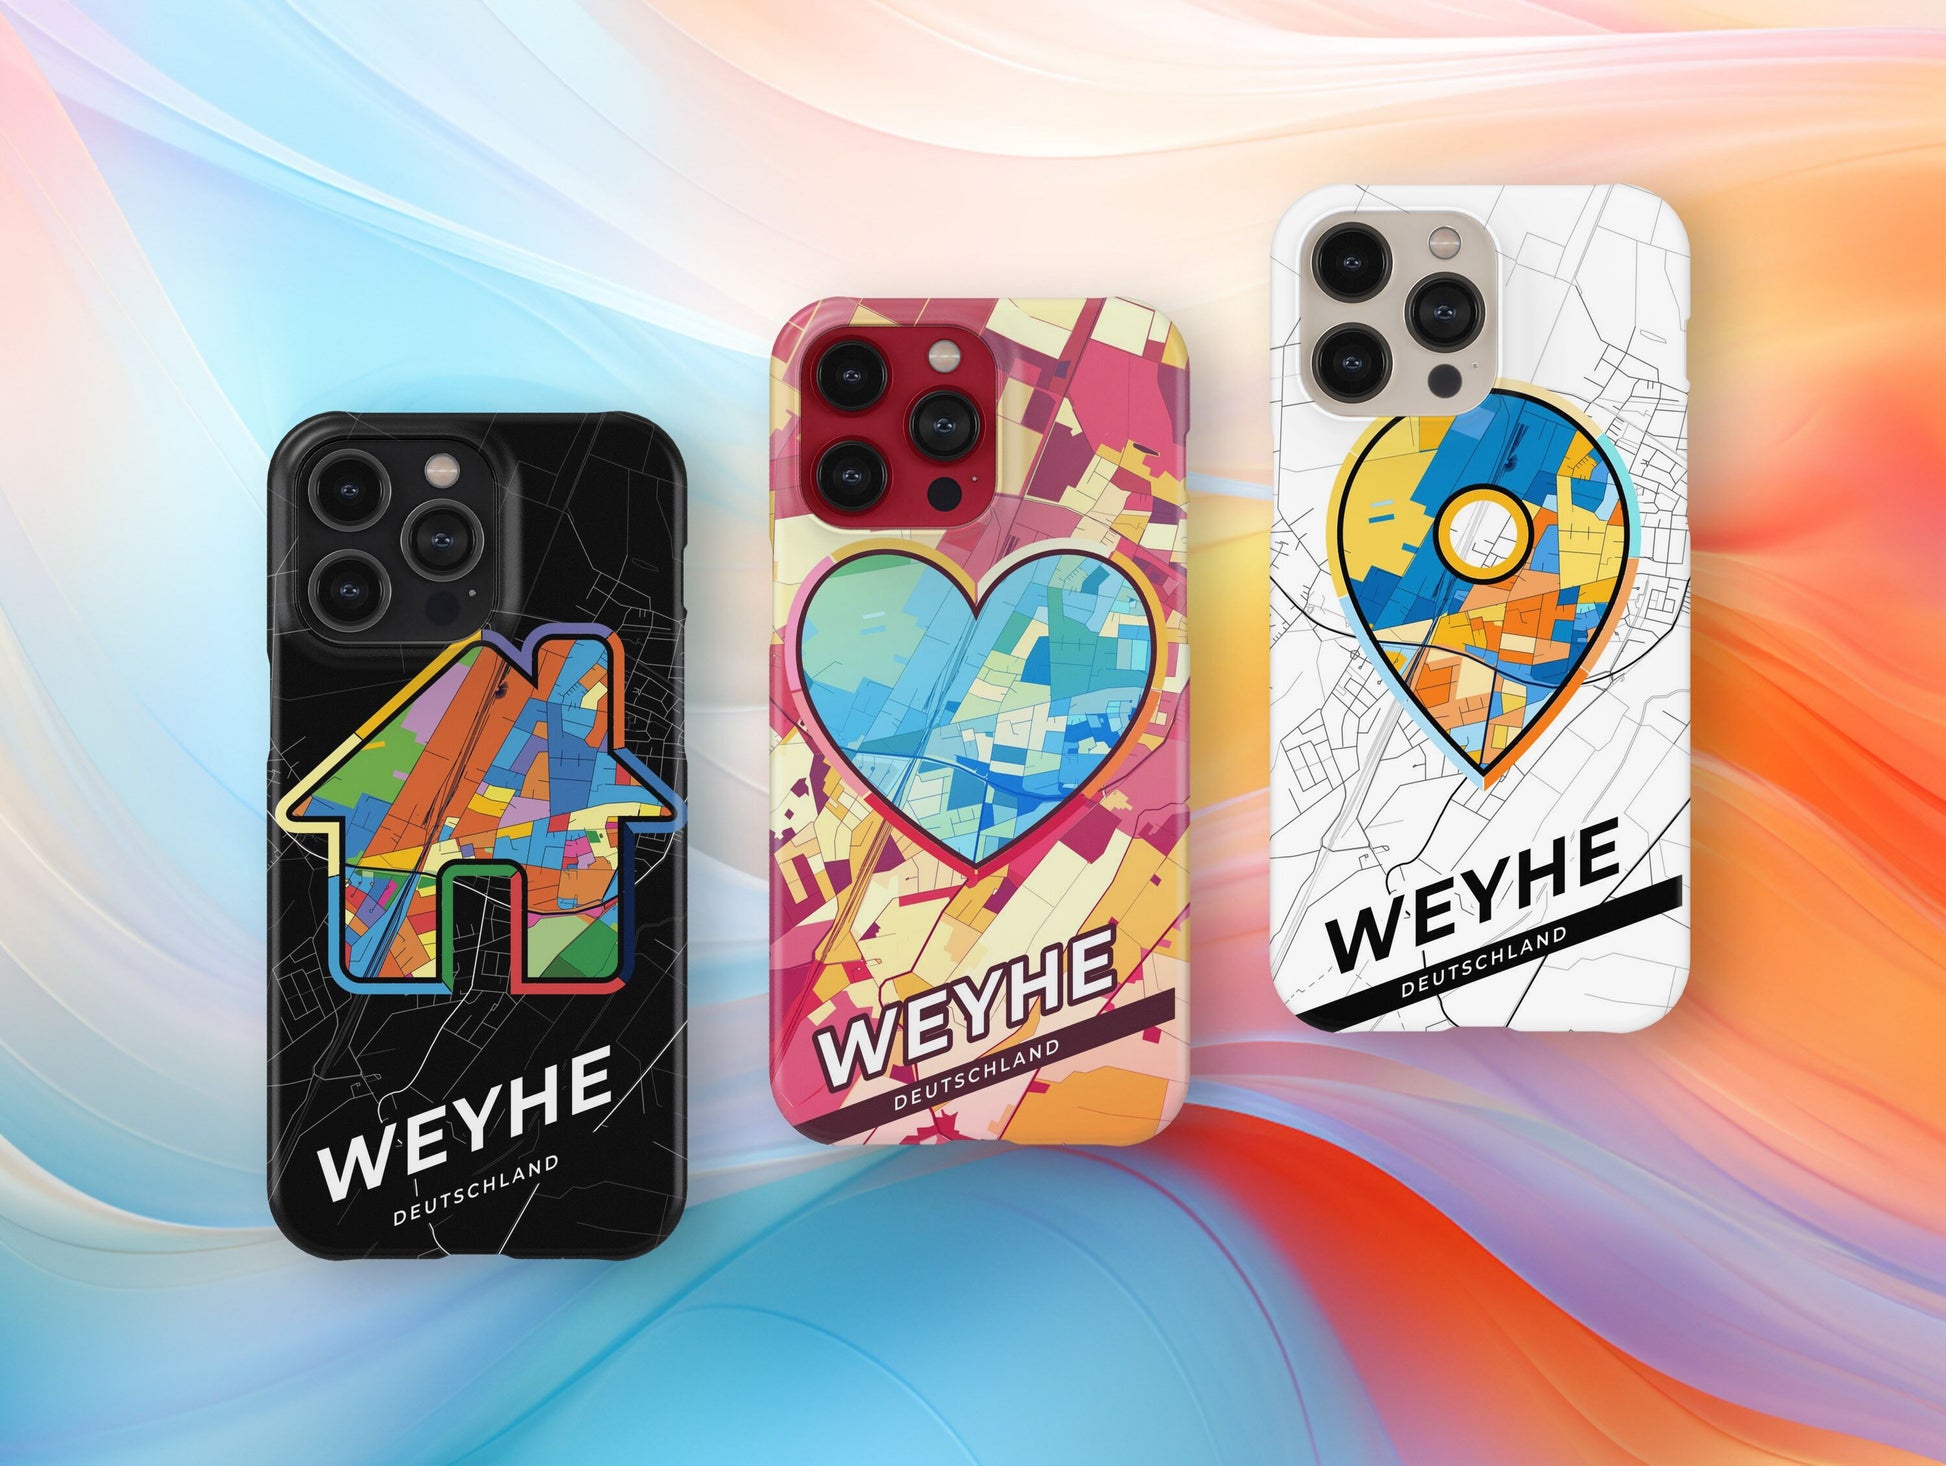 Weyhe Deutschland slim phone case with colorful icon